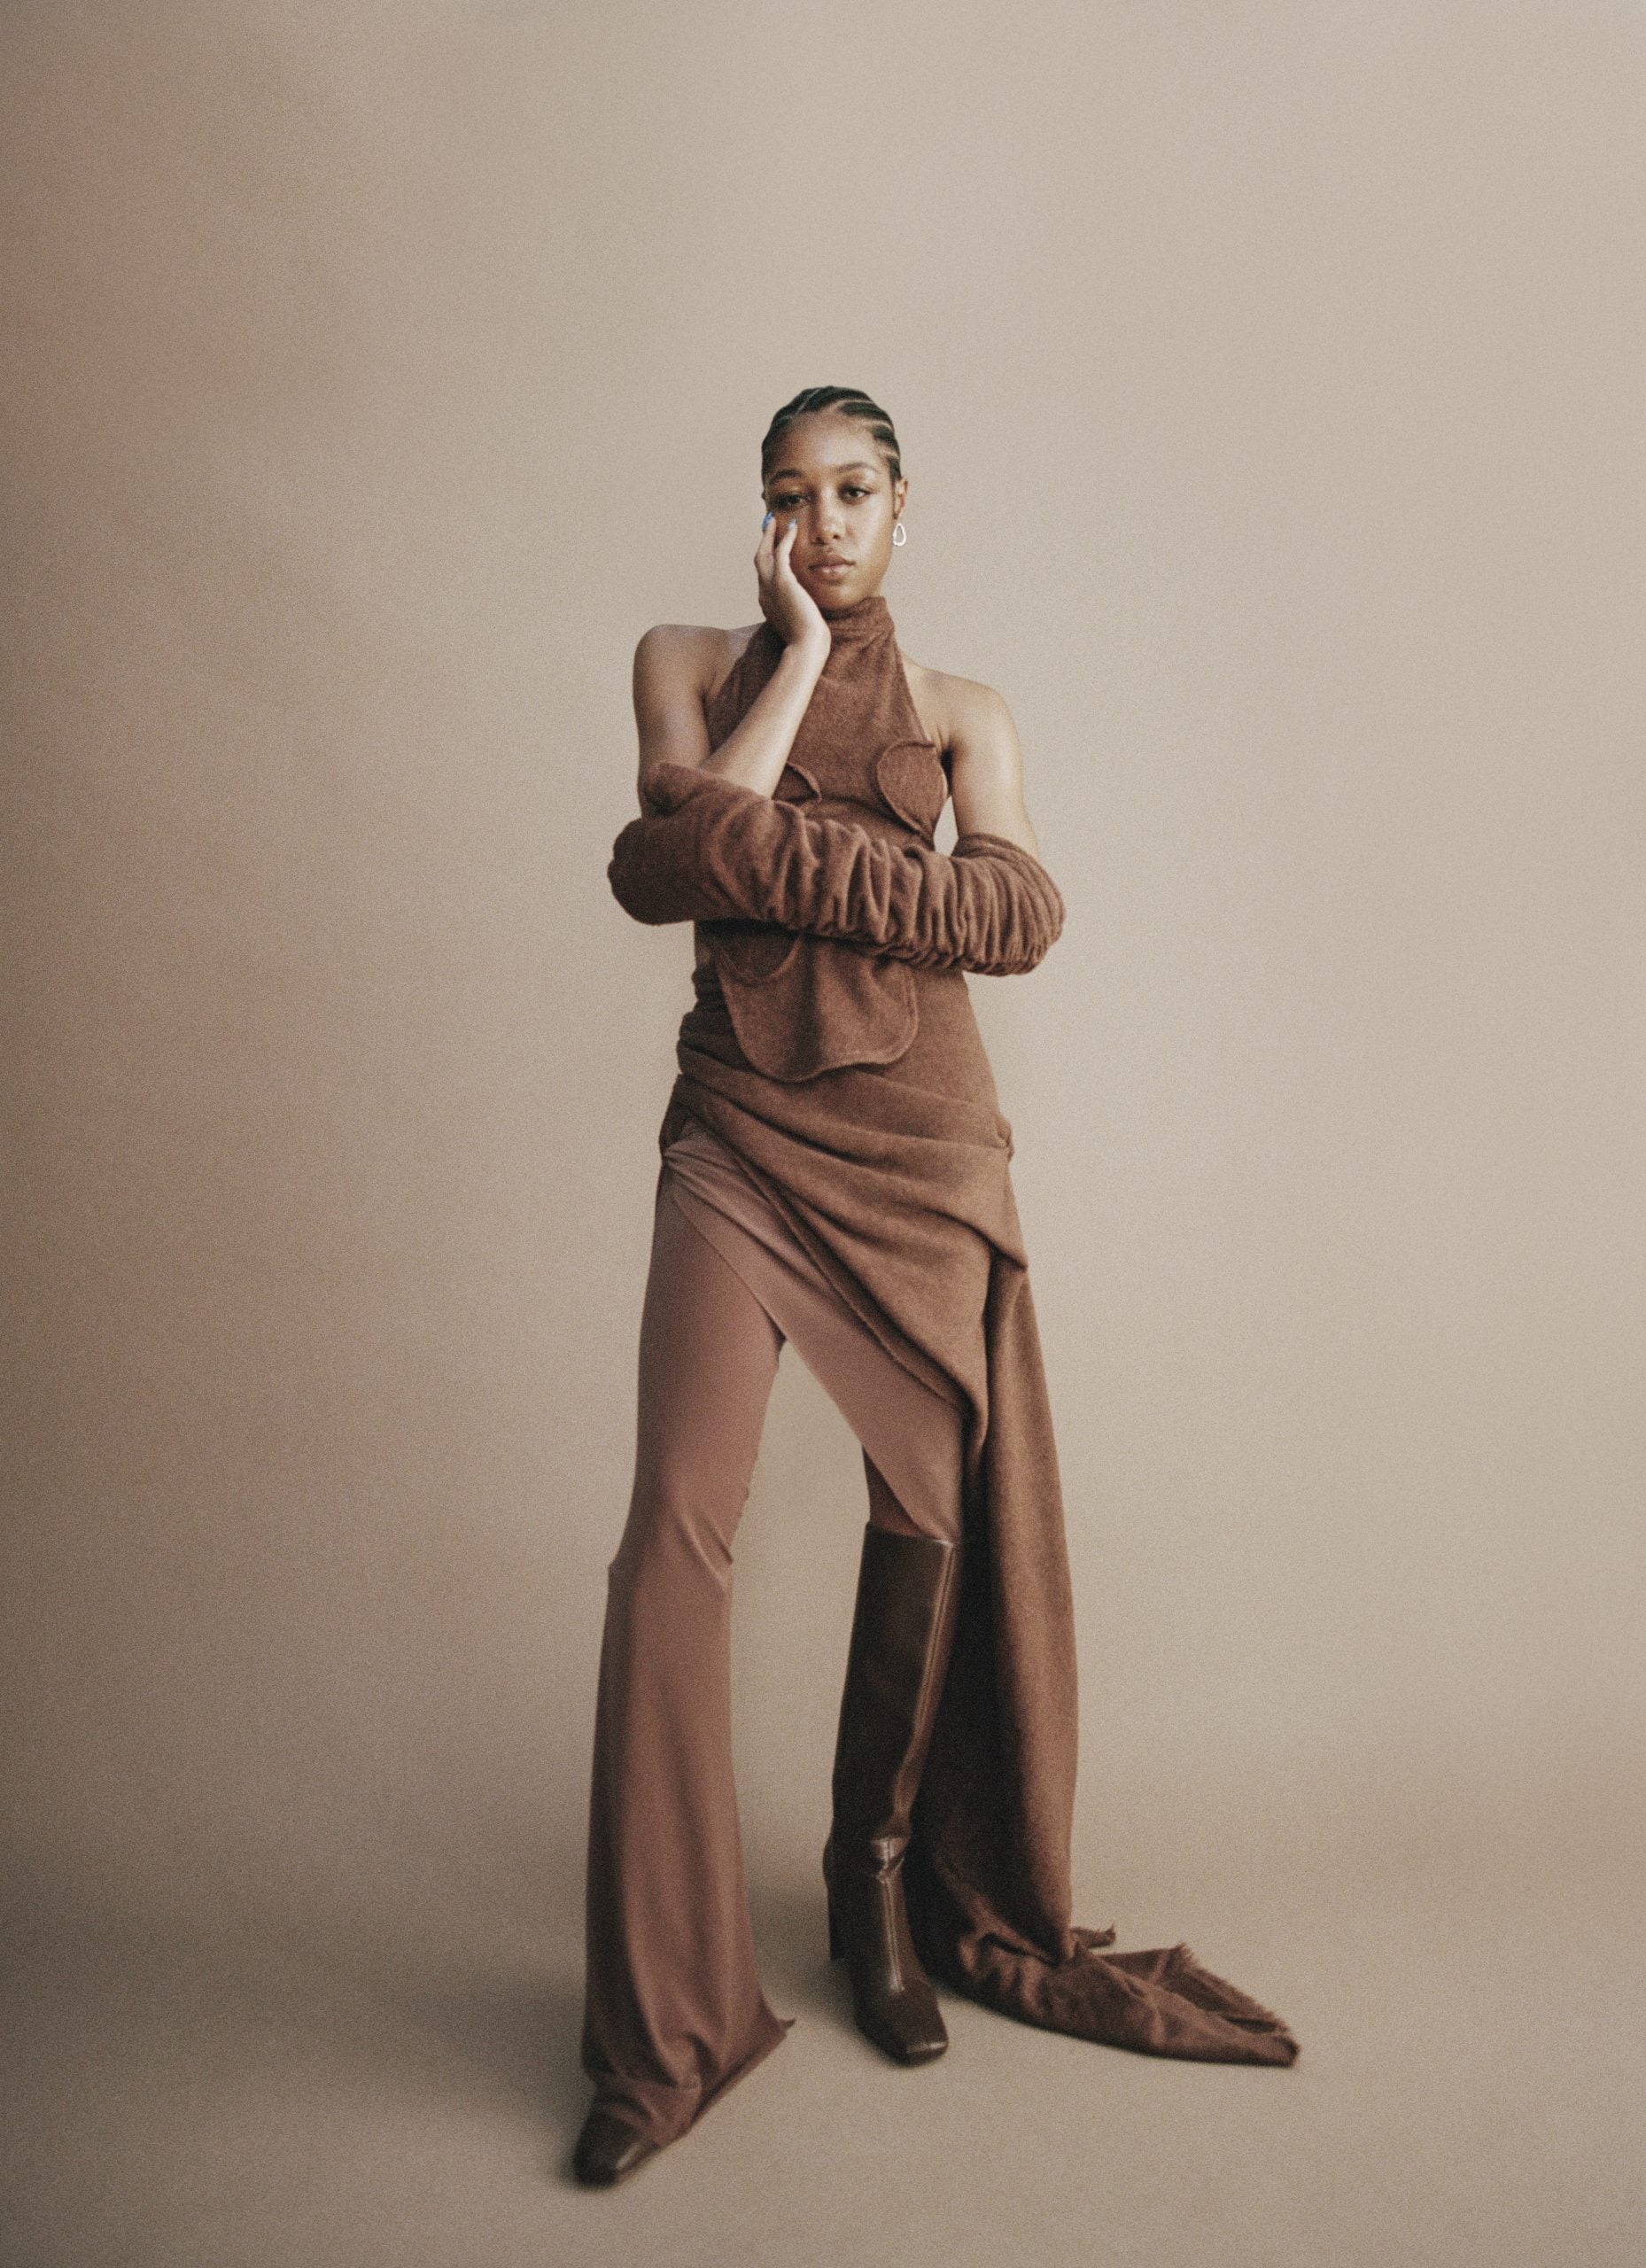 Designer Spotlight: Selasi Was Created Out Of Desire